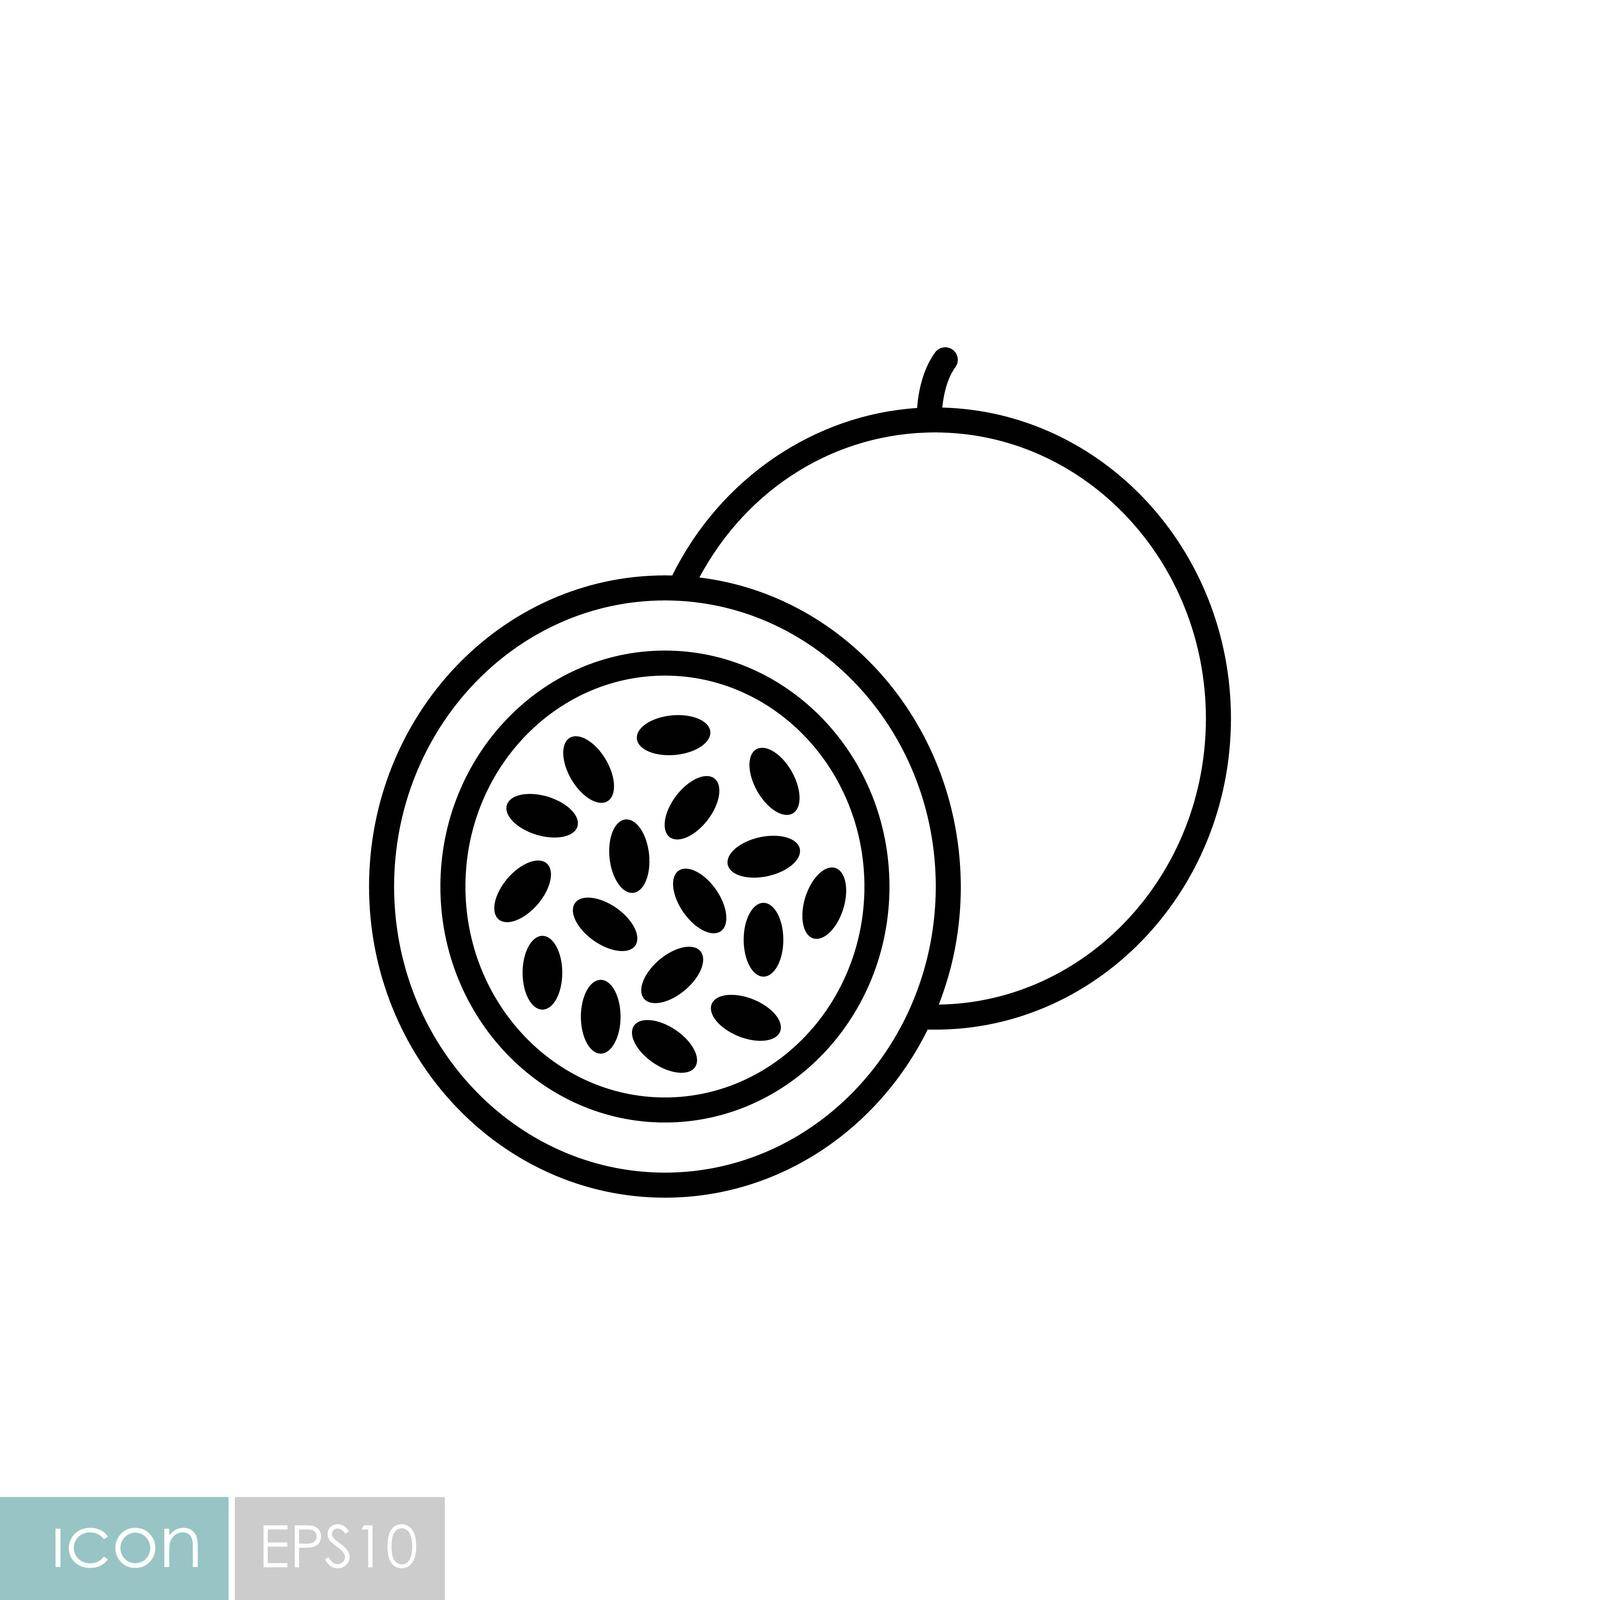 Passion fruit or maracuya vector icon. Graph symbol for food and drinks web site, apps design, mobile apps and print media, logo, UI